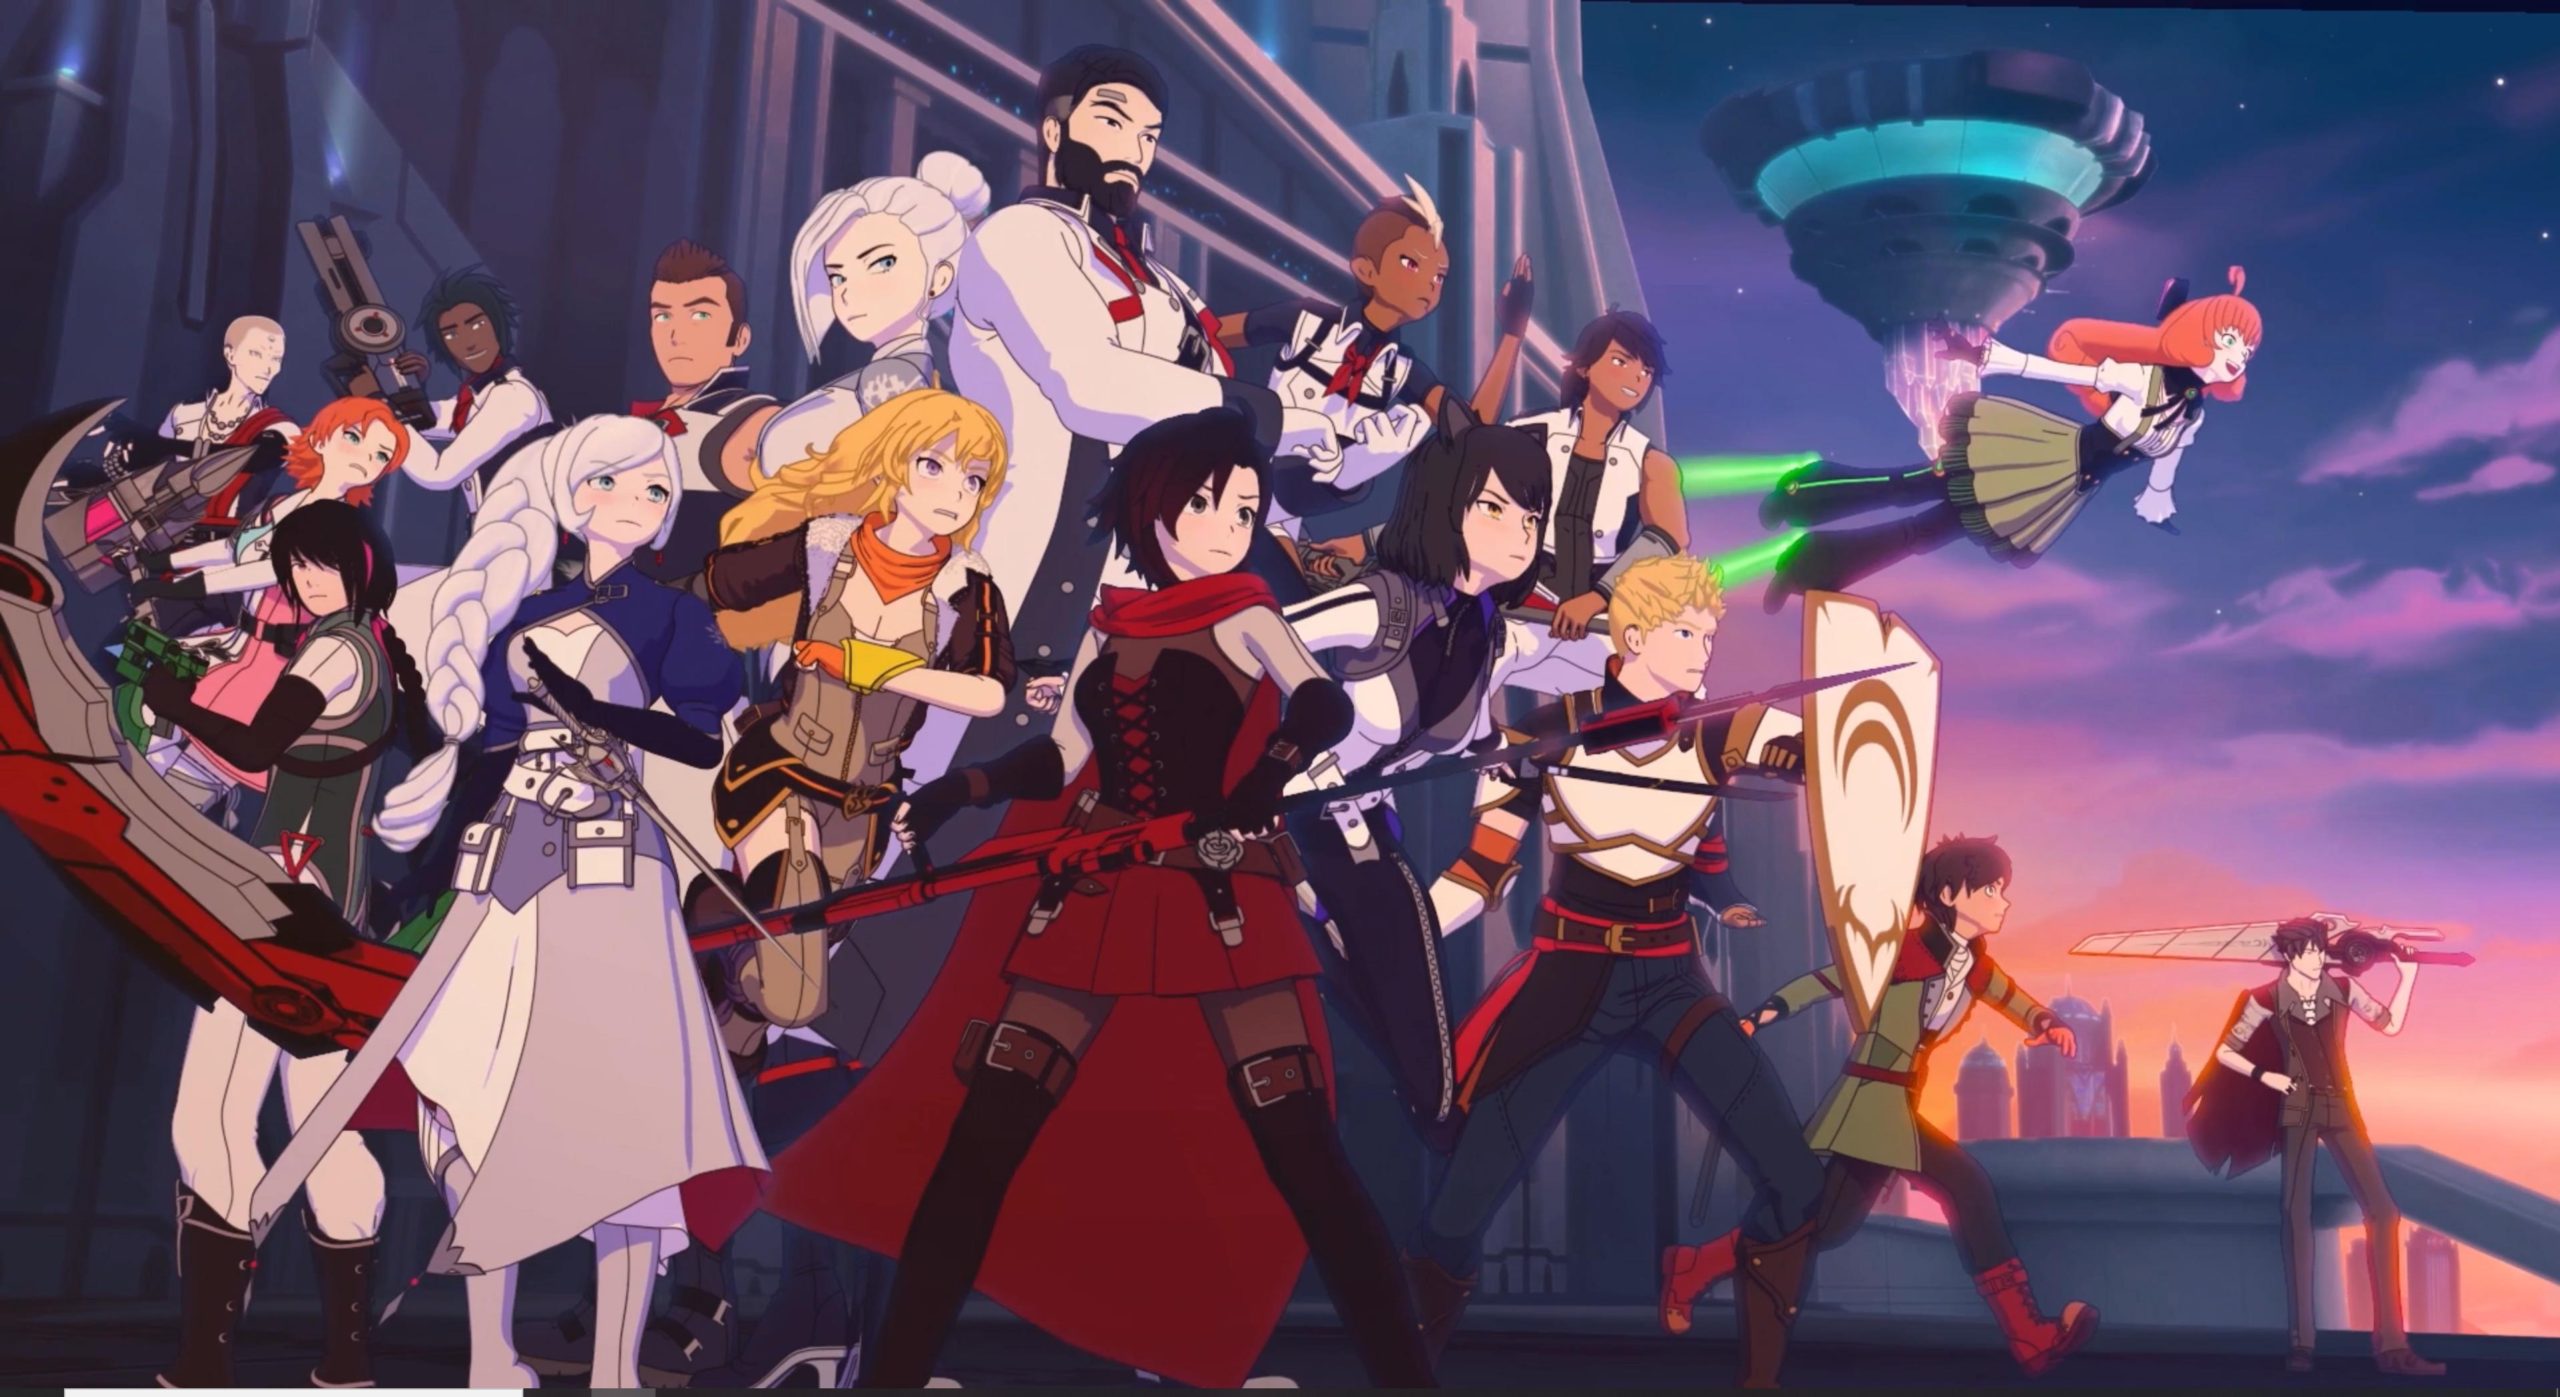 The cast of RWBY pose together with their redesigned looks in the opening of Volume 7.